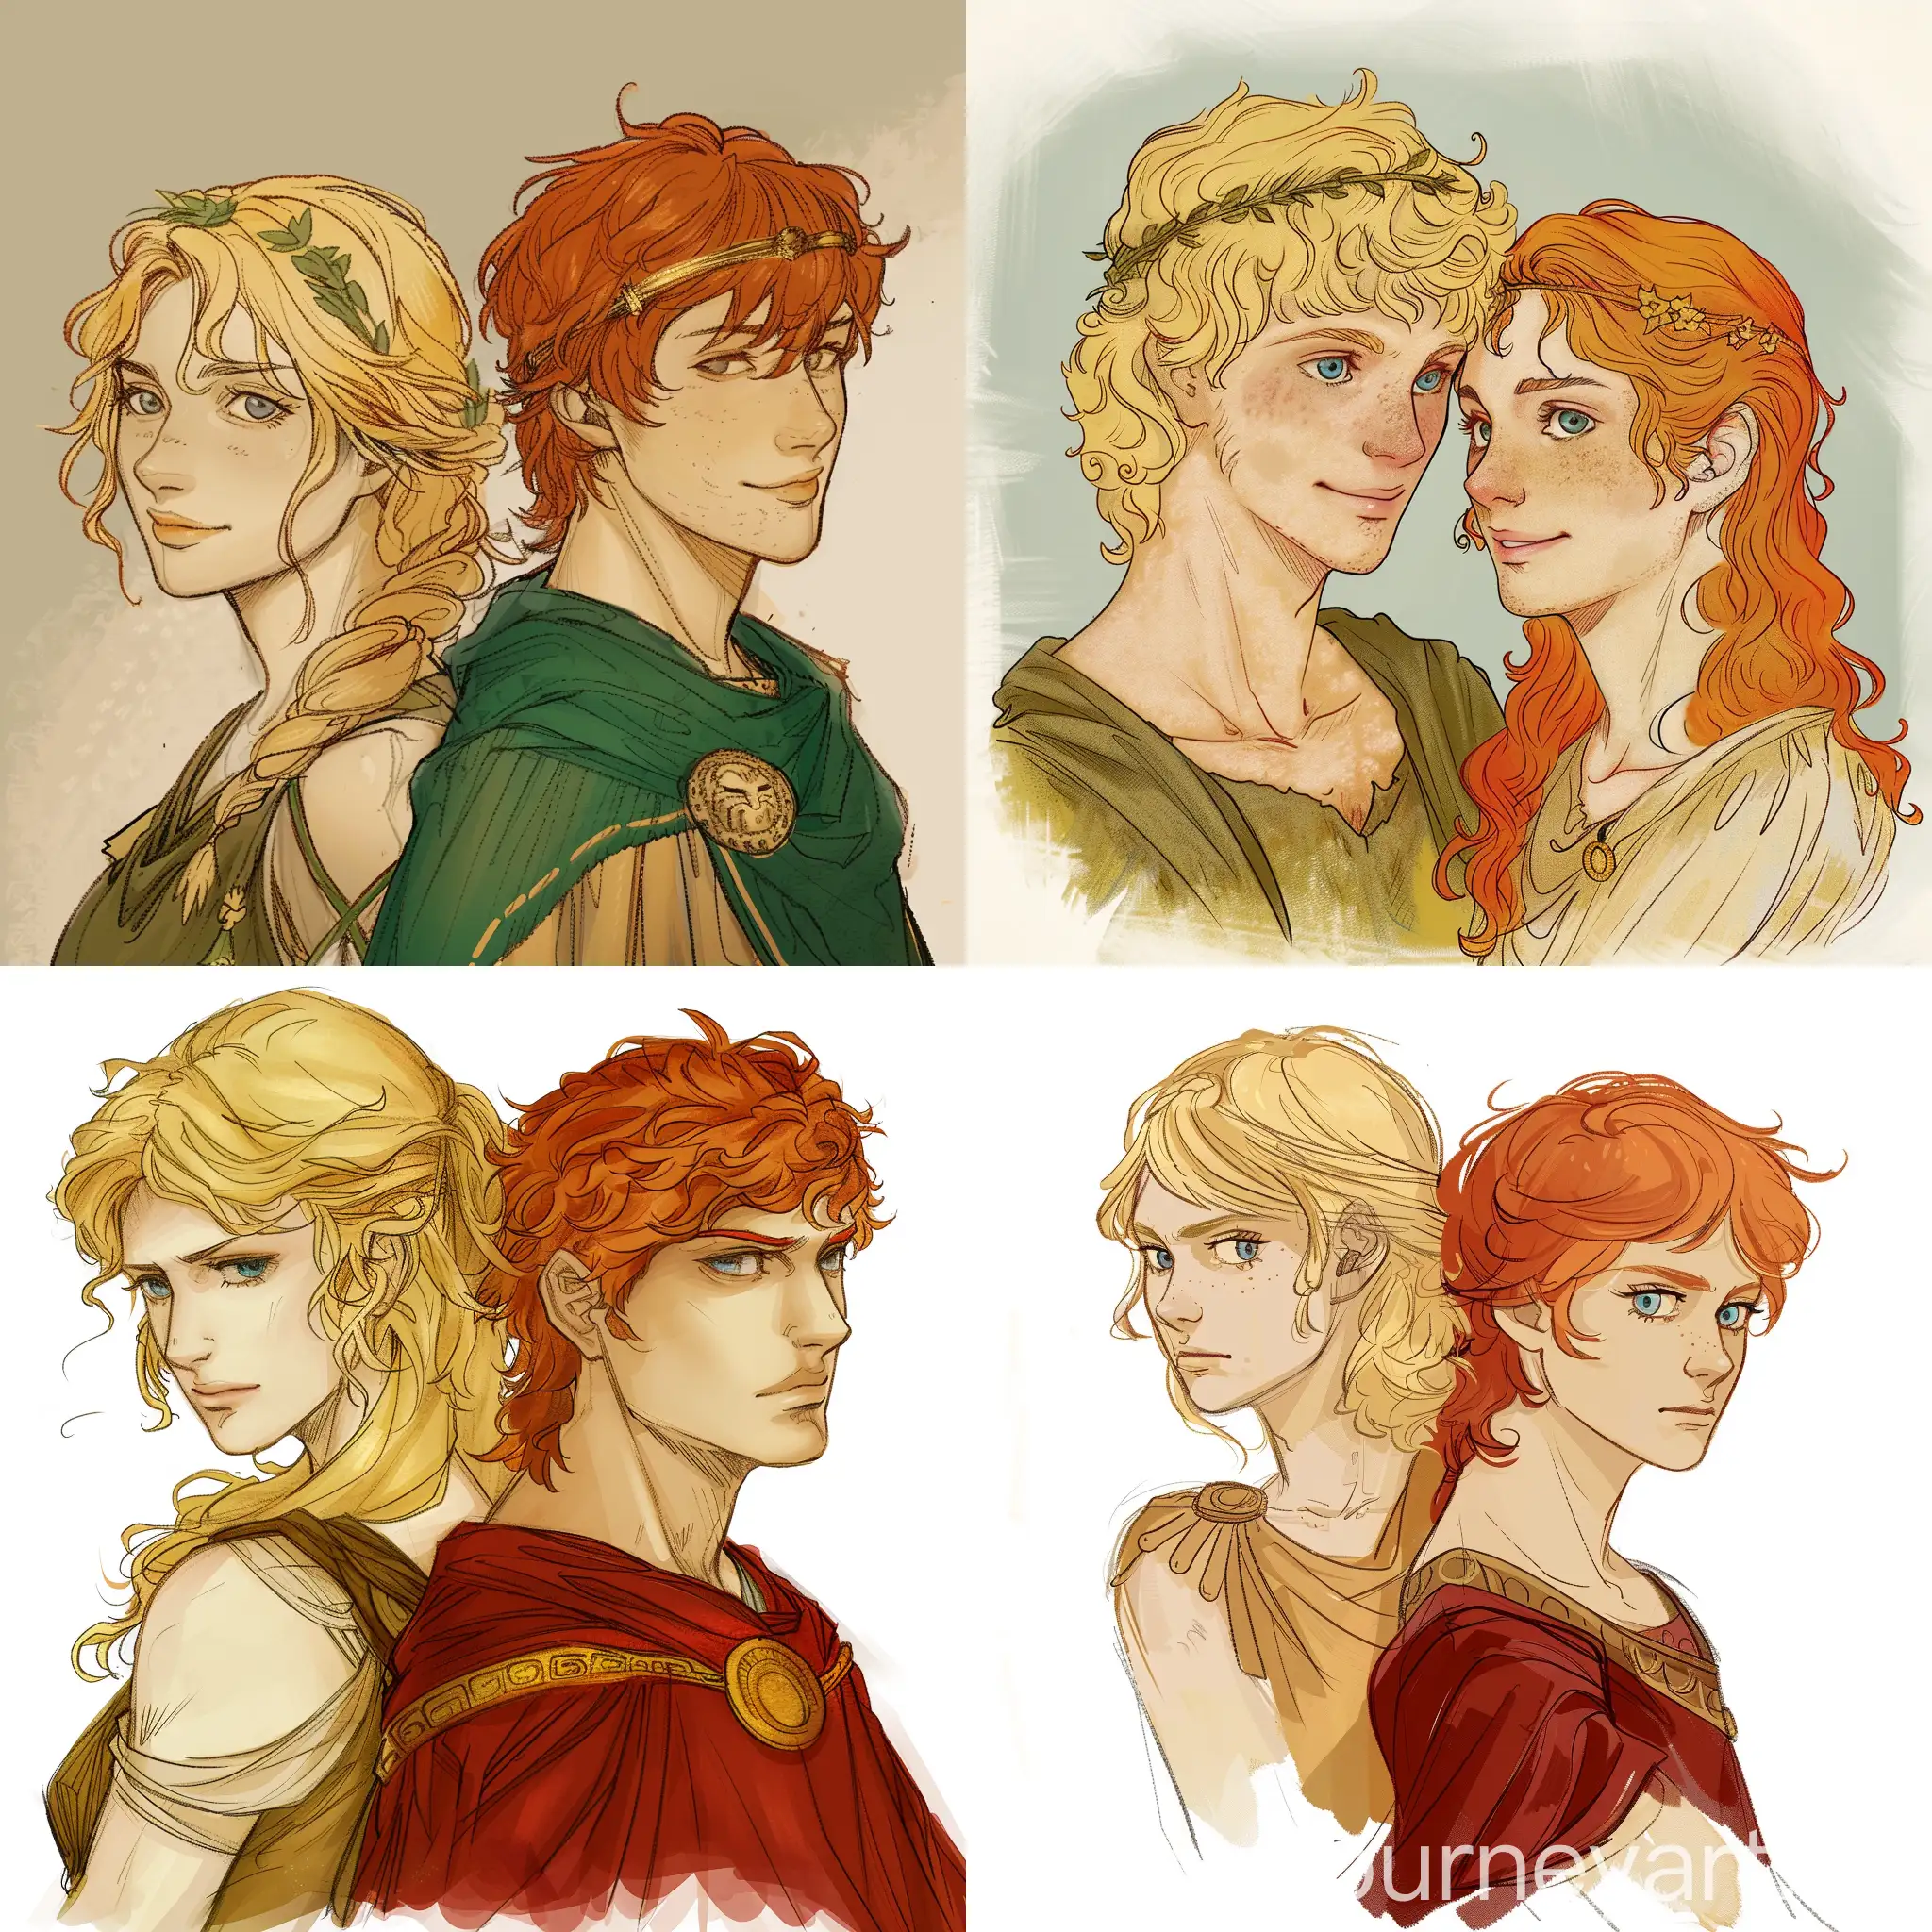 Simple drawing of blonde Helen and red-haired Menelaus.